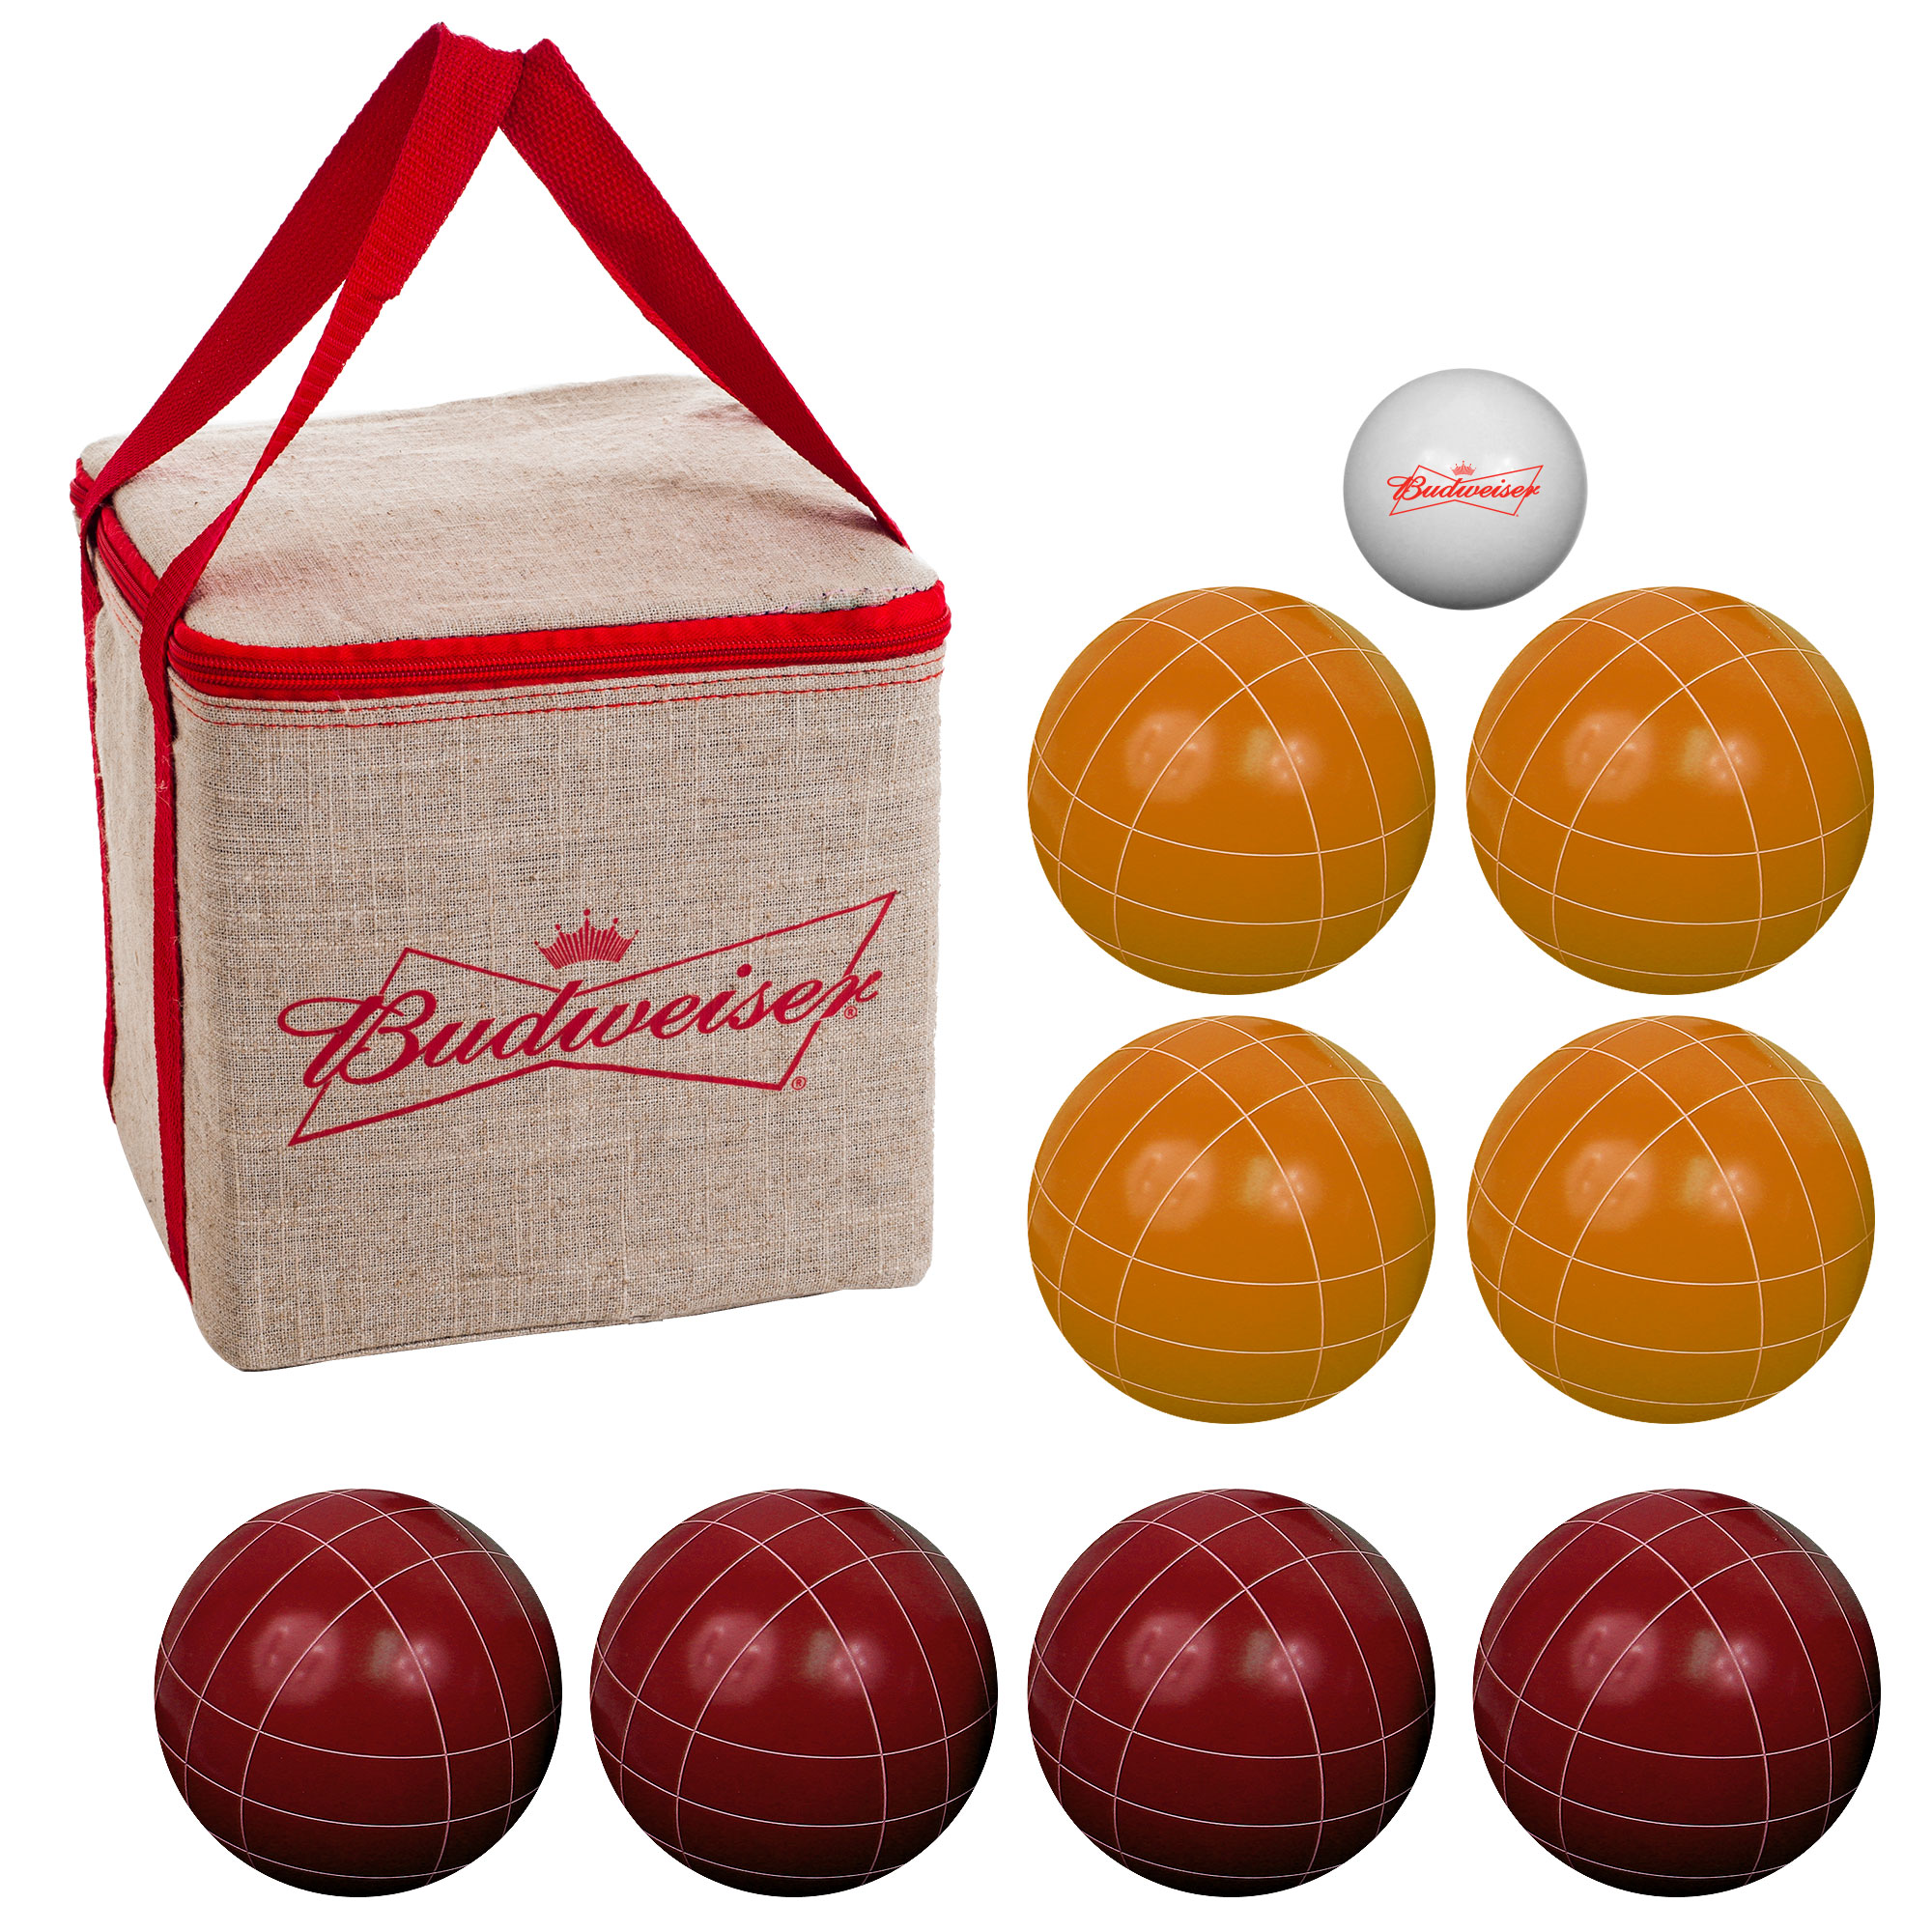 Bocce Ball Set- Regulation Outdoor Family Bocce Game by Hey! Play! (Budweiser) - image 2 of 2